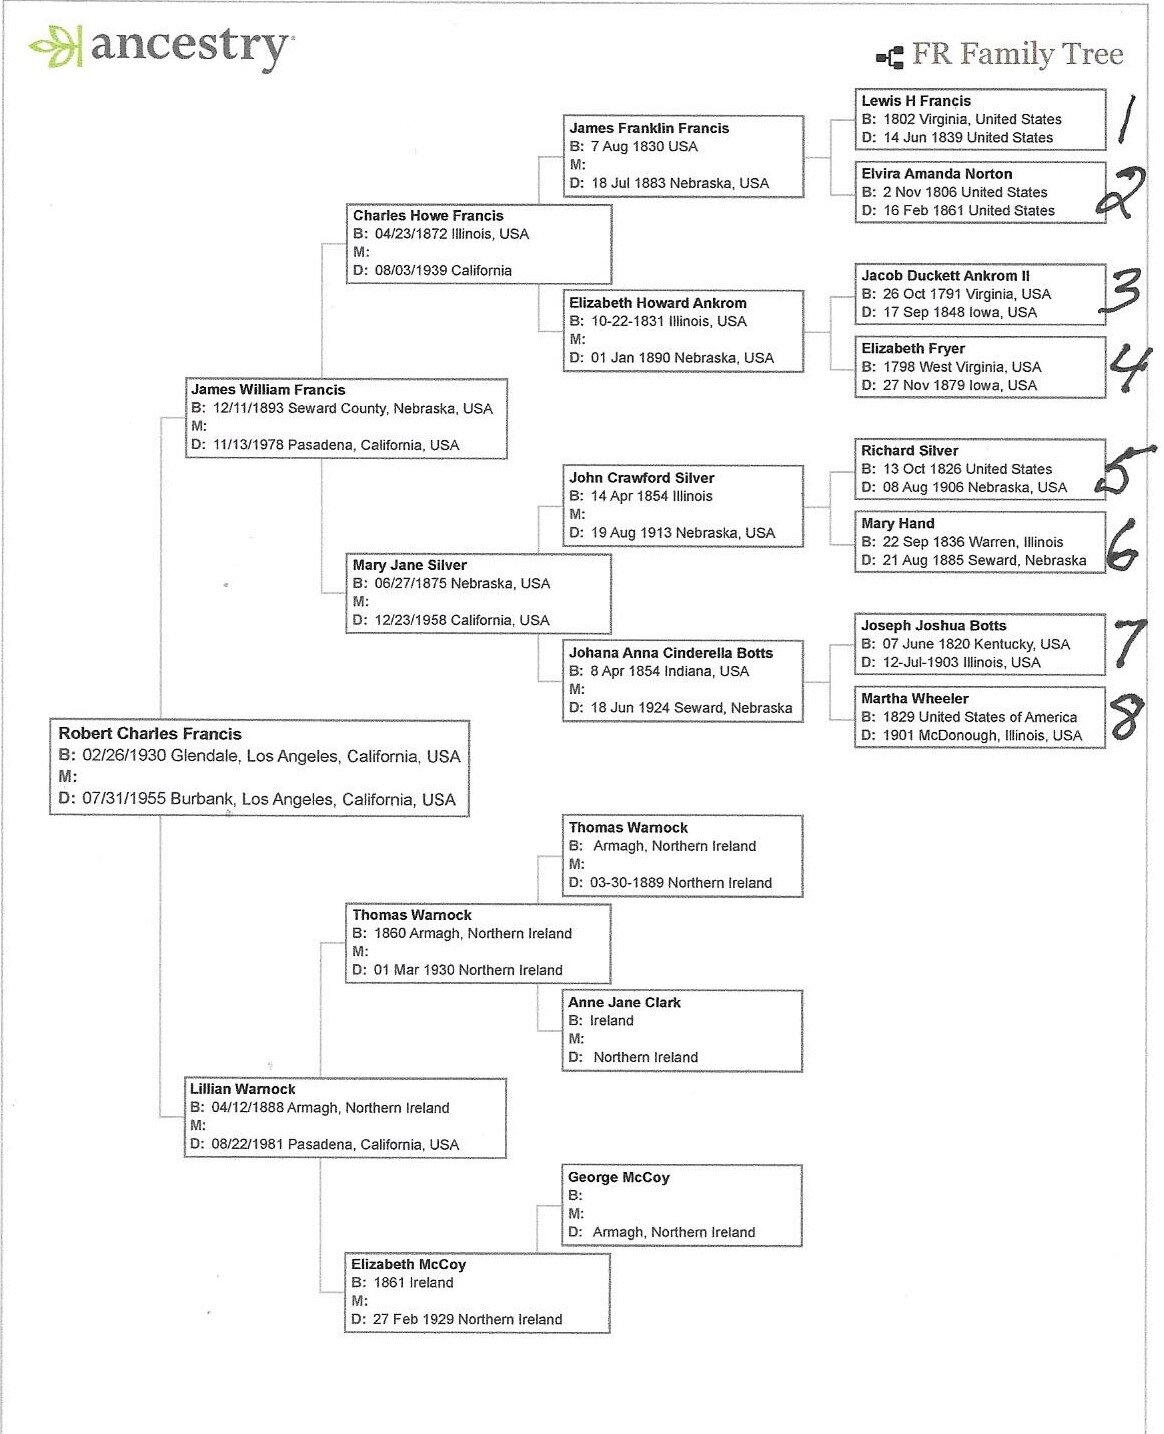  Genealogical Chart: Warnock and Francis  Bob Francis’ Family Tree created by DW, 2020.  Special thanks to Joan Shurtliff, Seward County Genealogical Society, Seward, Neb.  See Sidebars - Galleries and Information pages for a complete genealogical re